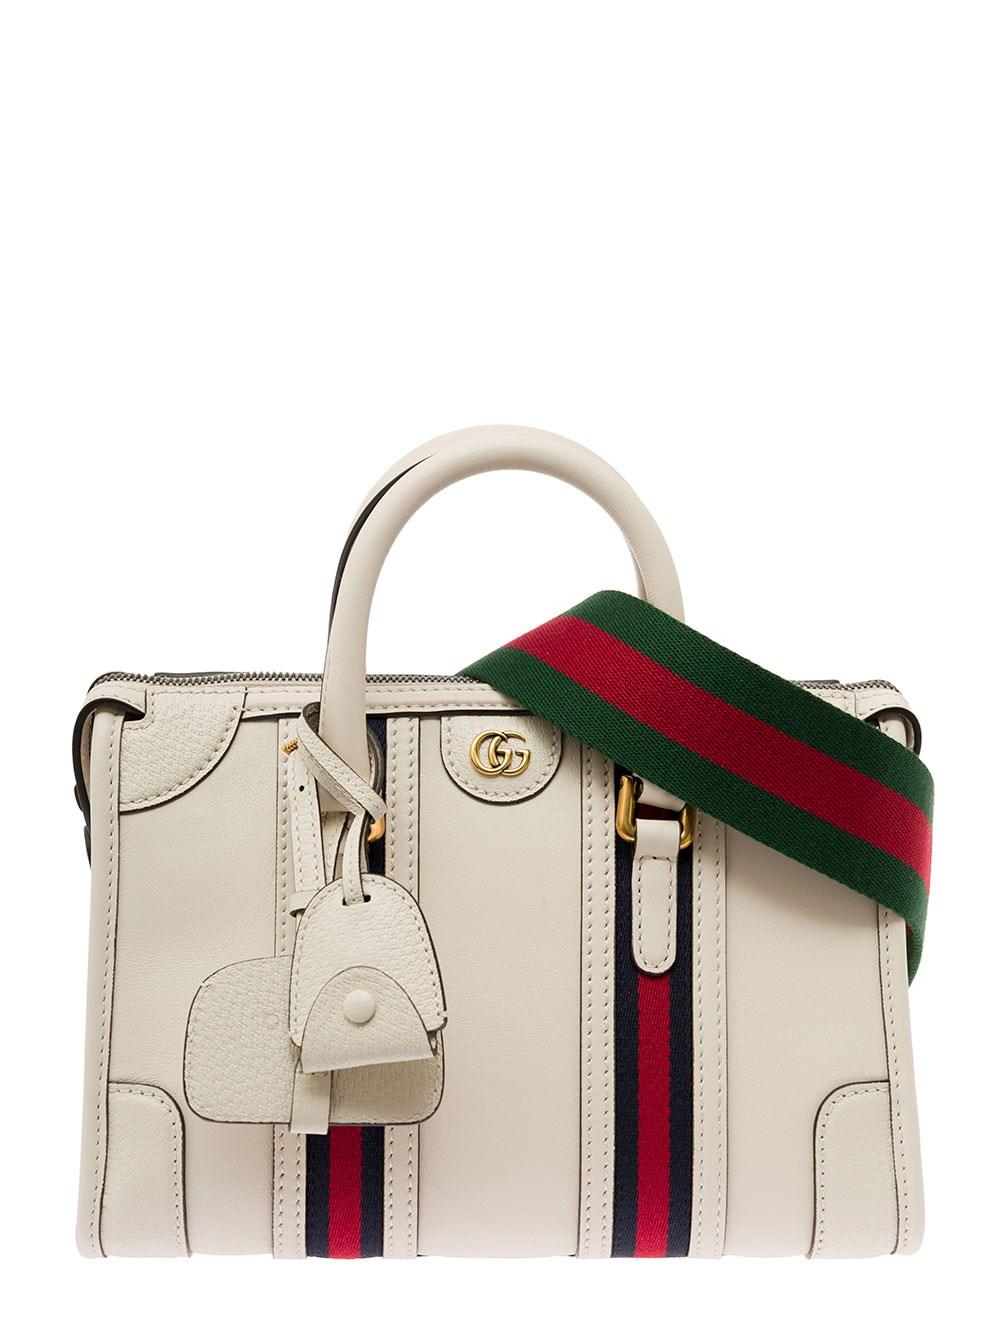 Gucci Medium Duffle Bag With Gg Logo And Web Motif in White | Lyst